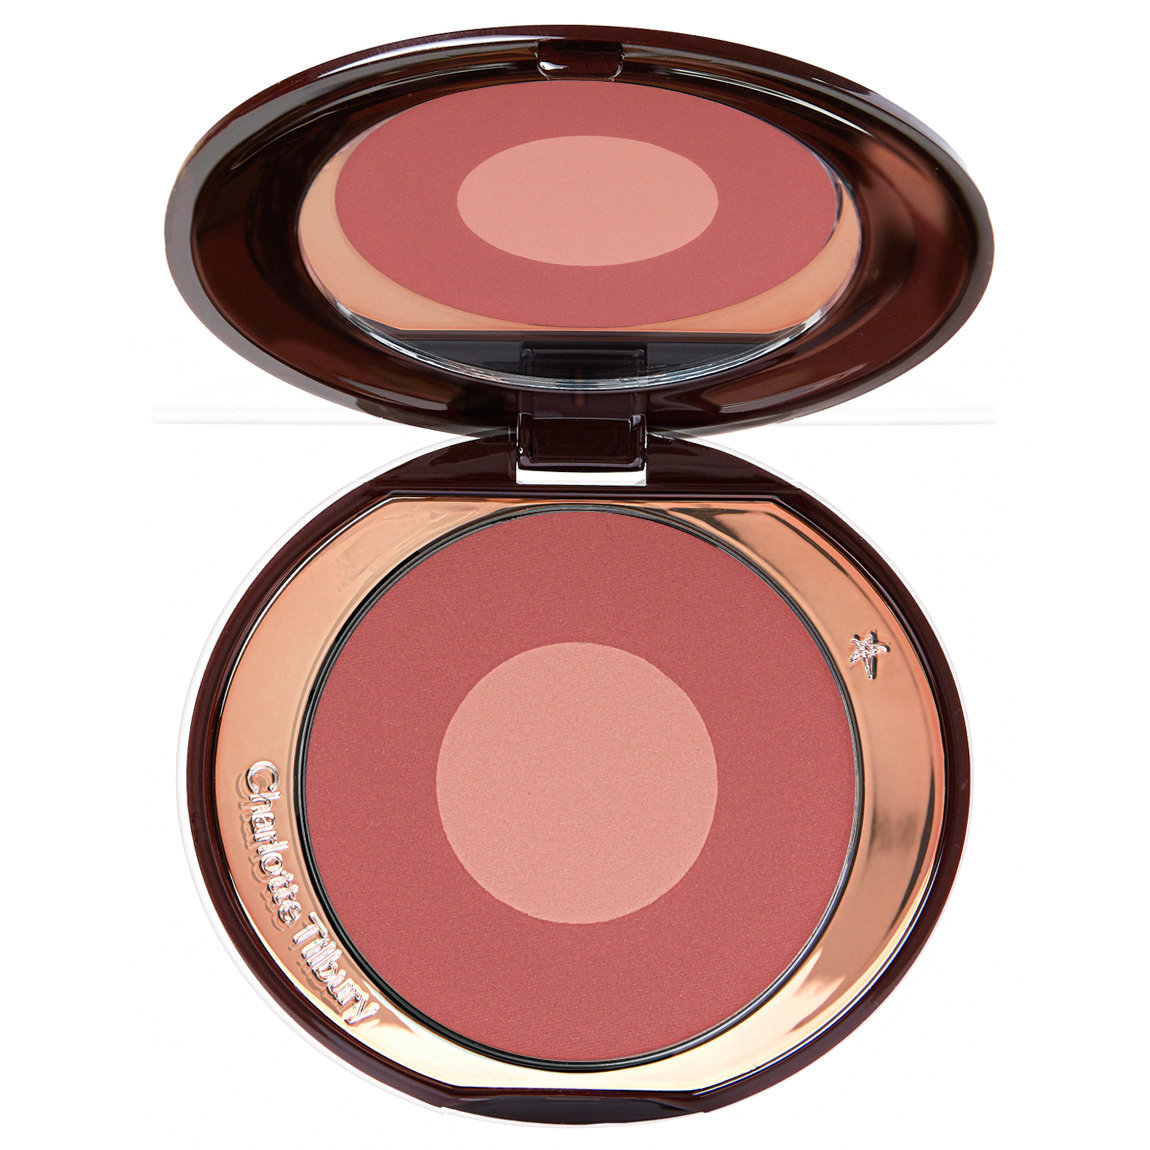 Charlotte Tilbury Cheek To Chic Pillow Talk alternative view 1 - product swatch.